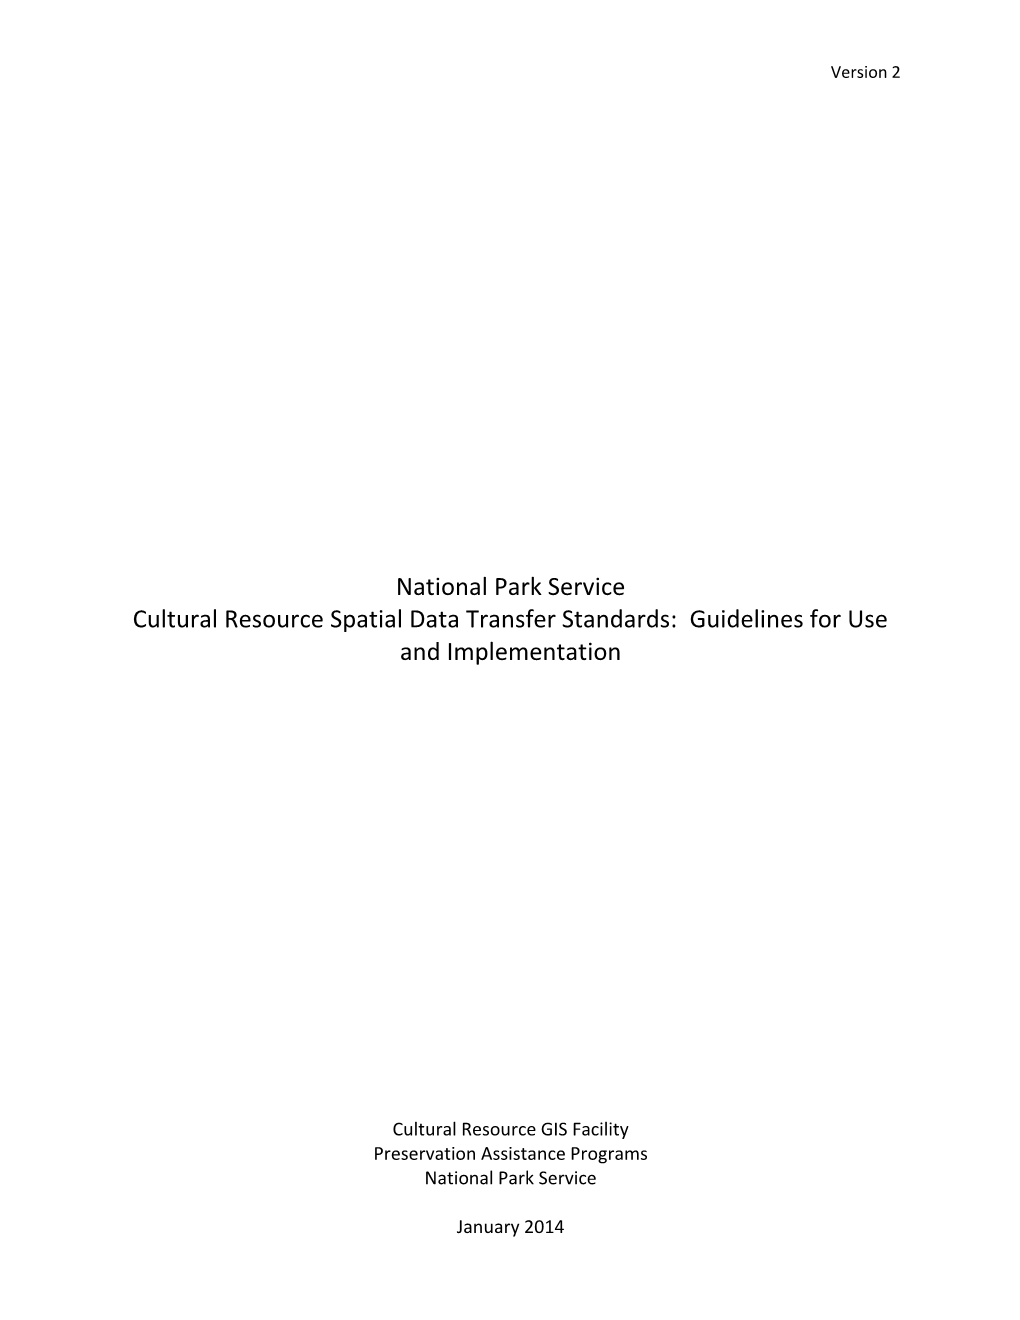 National Parks Service Cultural Resource Spatial Data